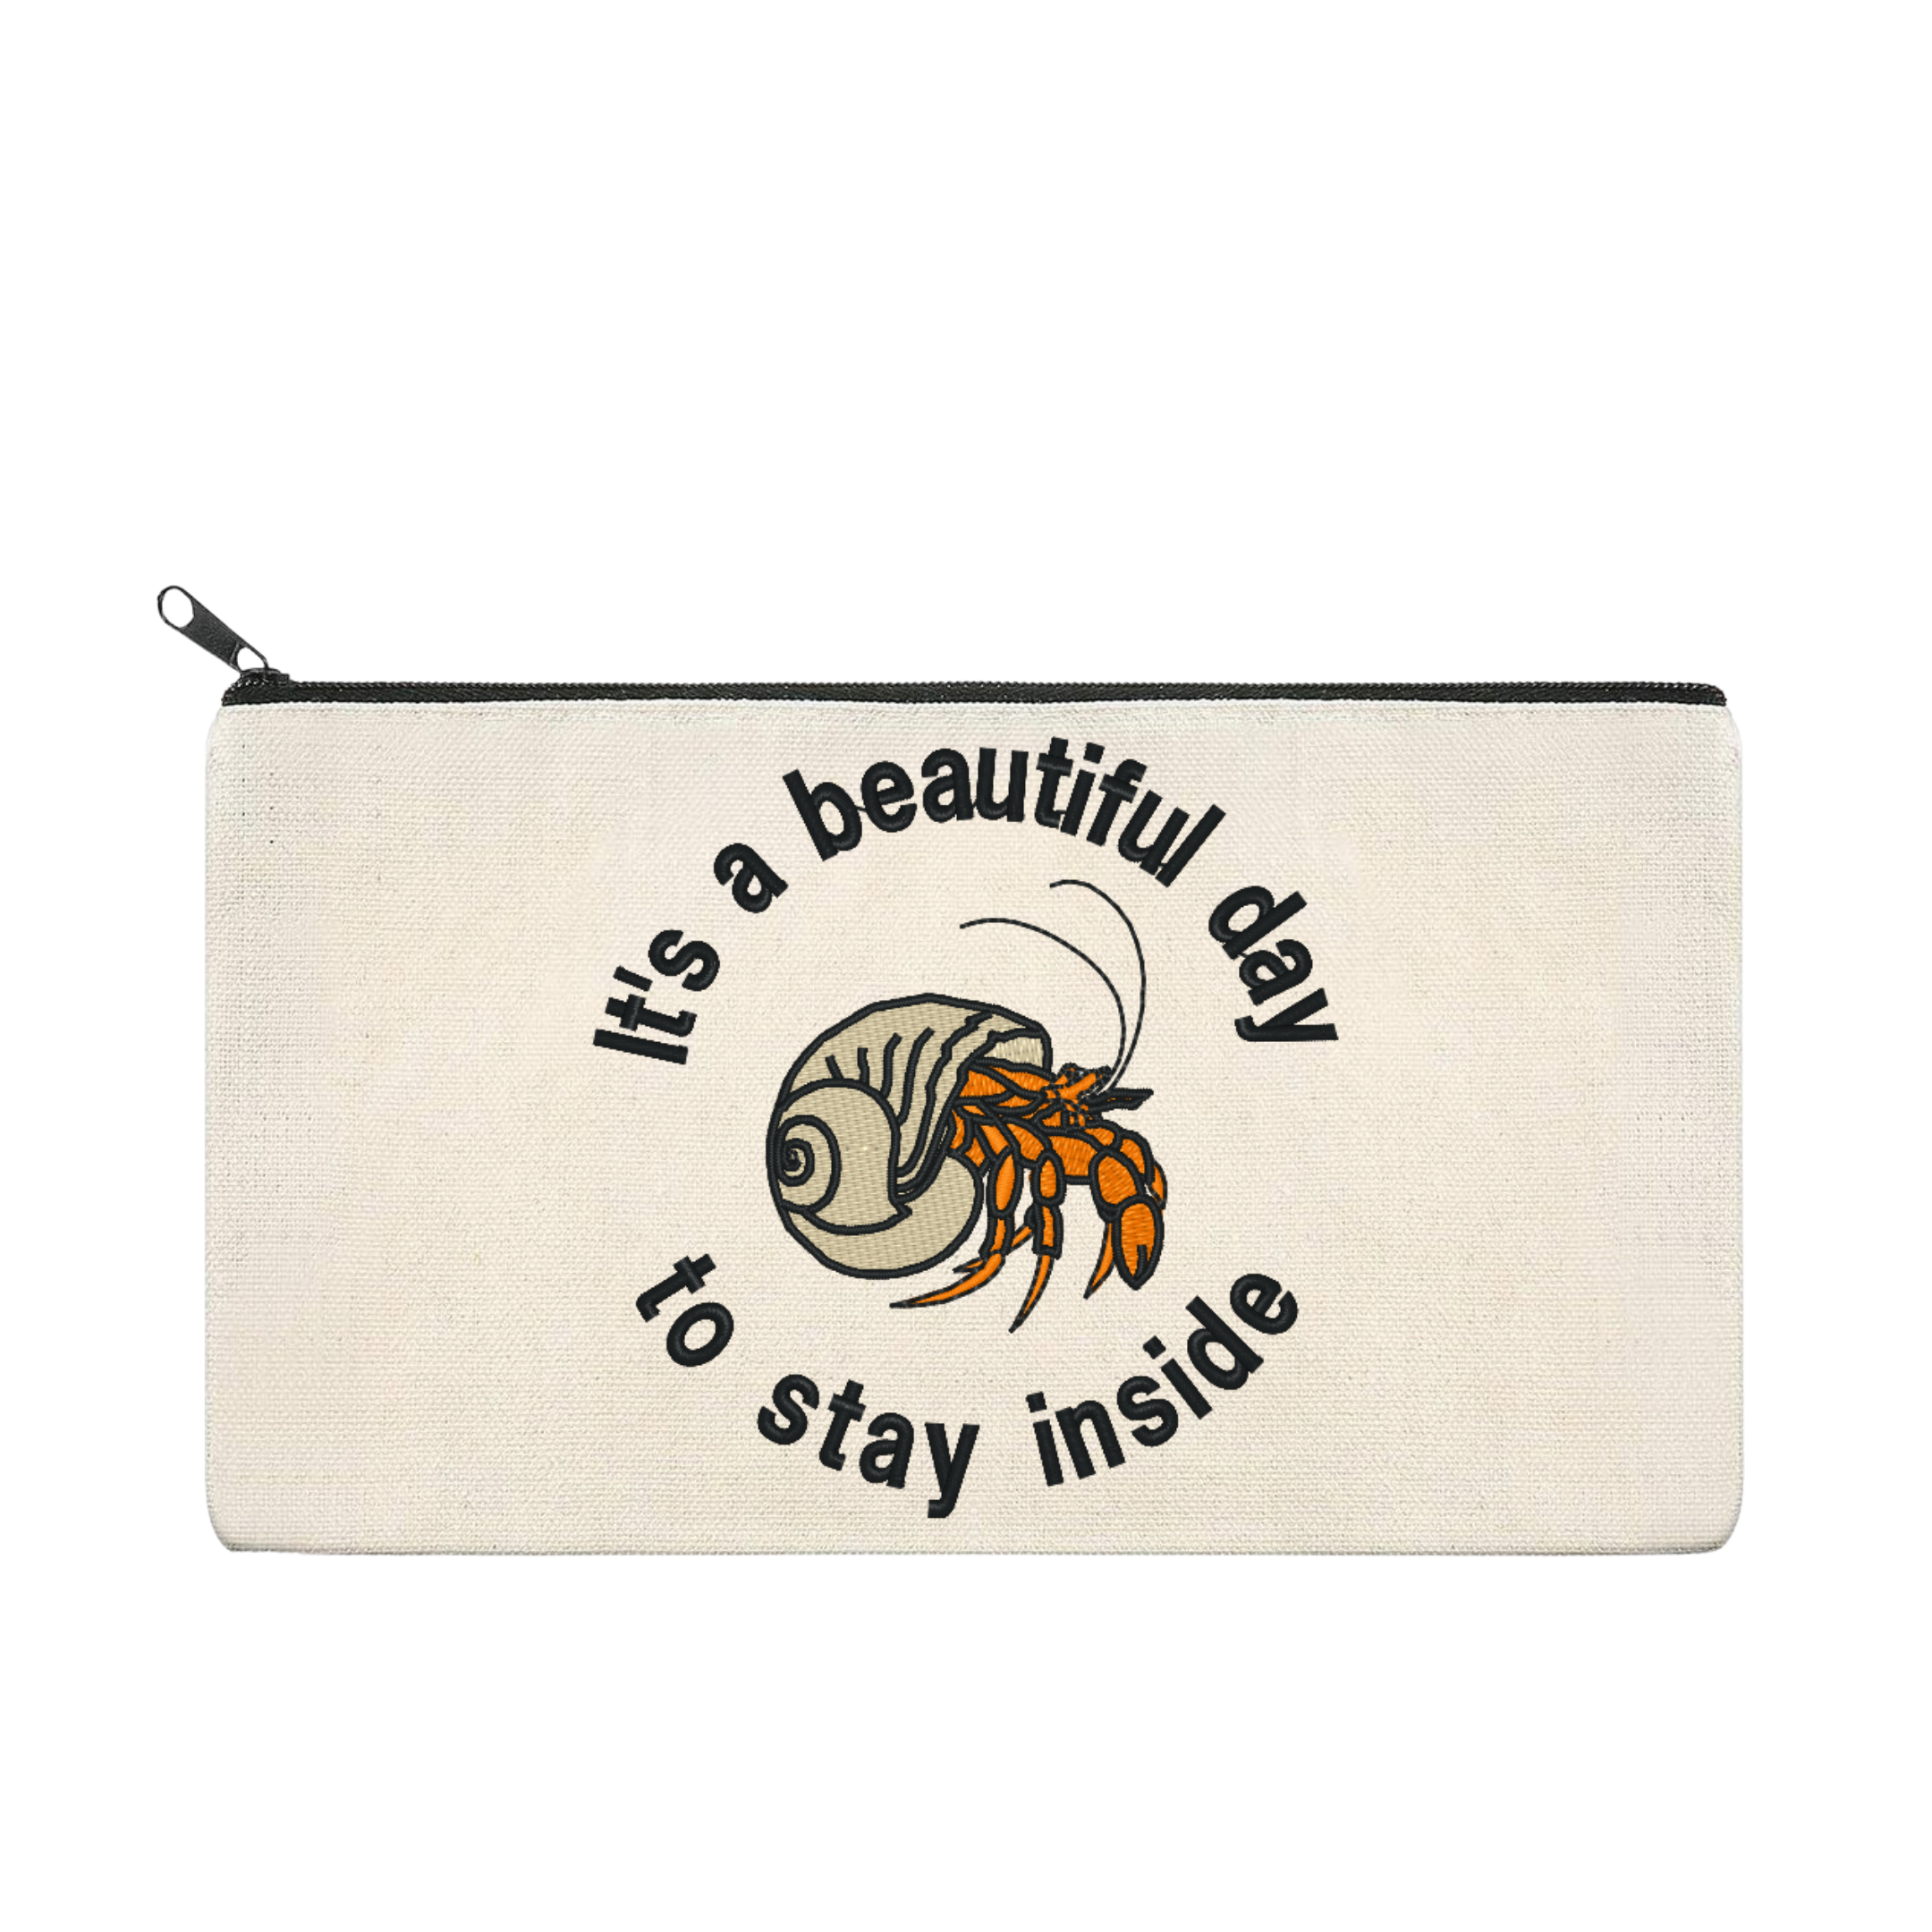 Beautiful Day to Stay Inside Hermit Crab Embroidered Multipurpose Zipper Pouch Bag